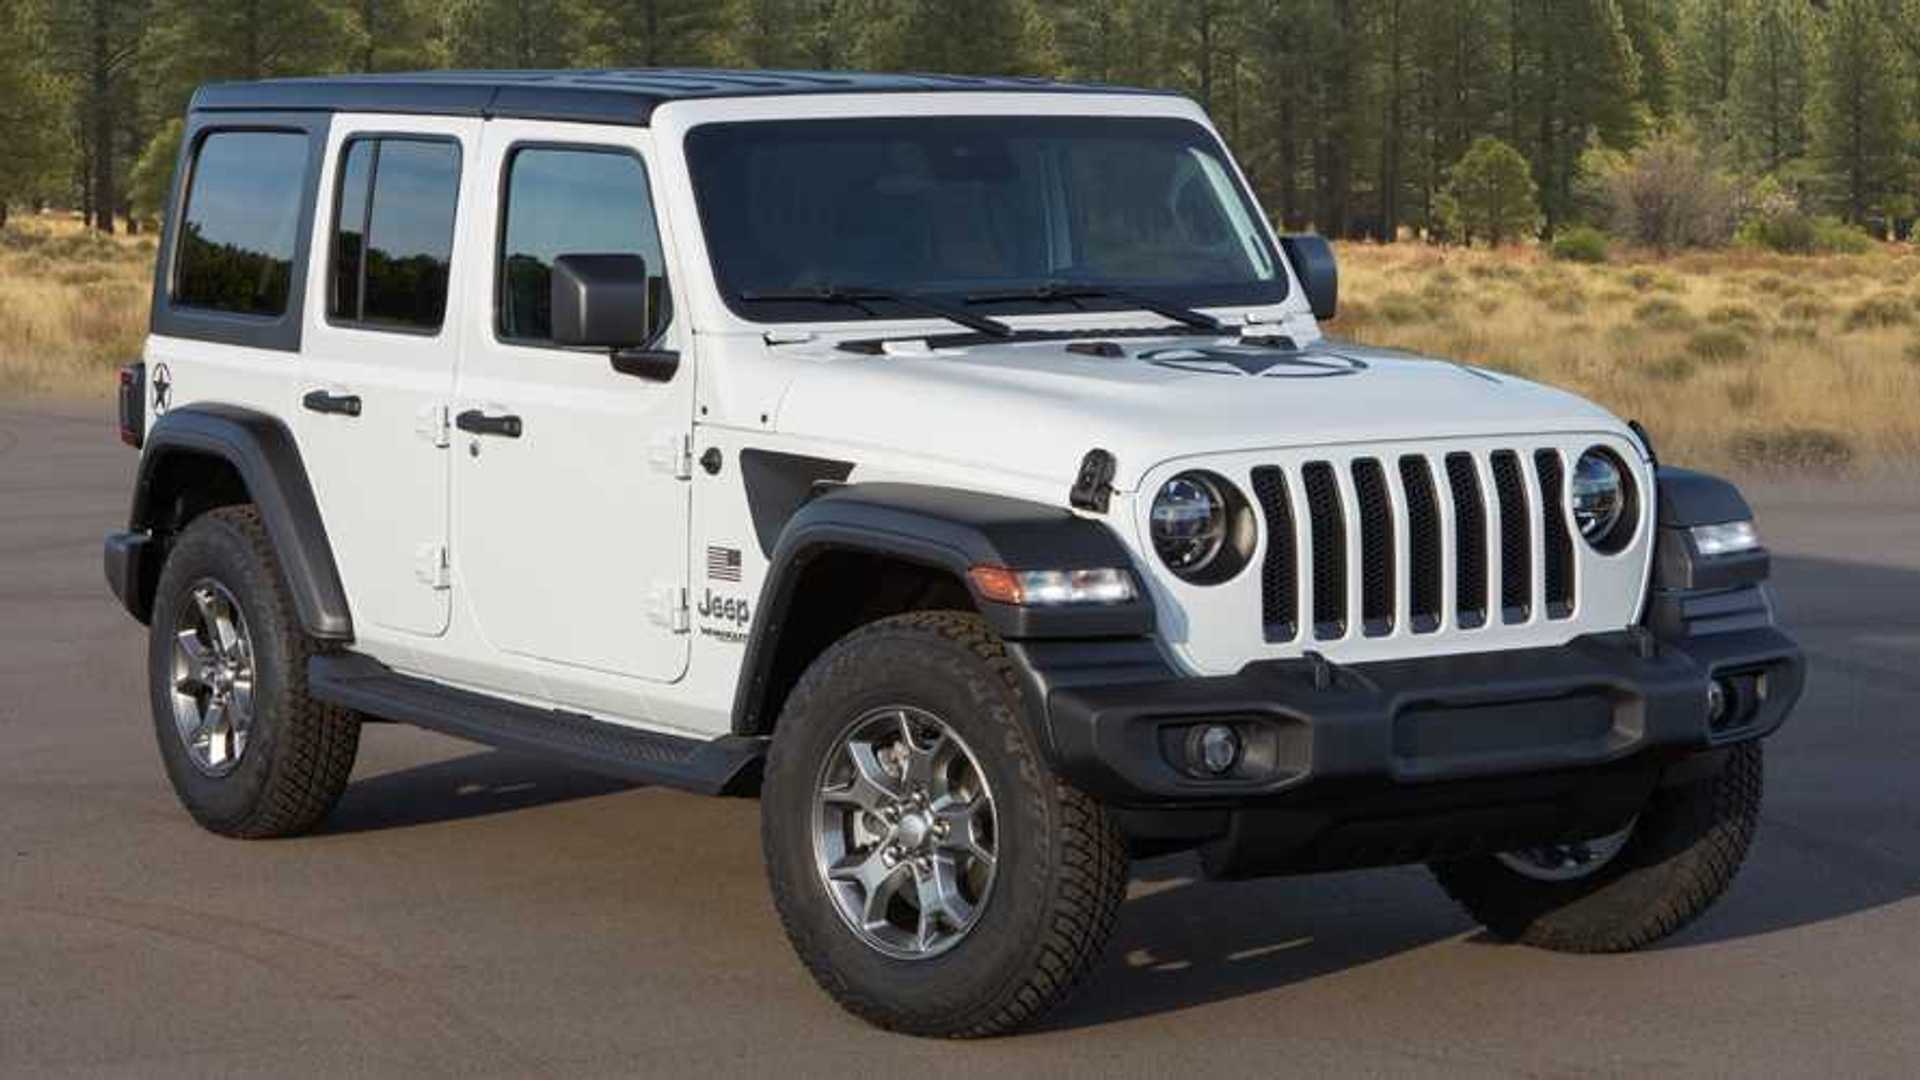 2020 Jeep Wrangler Freedom Edition Debuts With A Patriotic Body